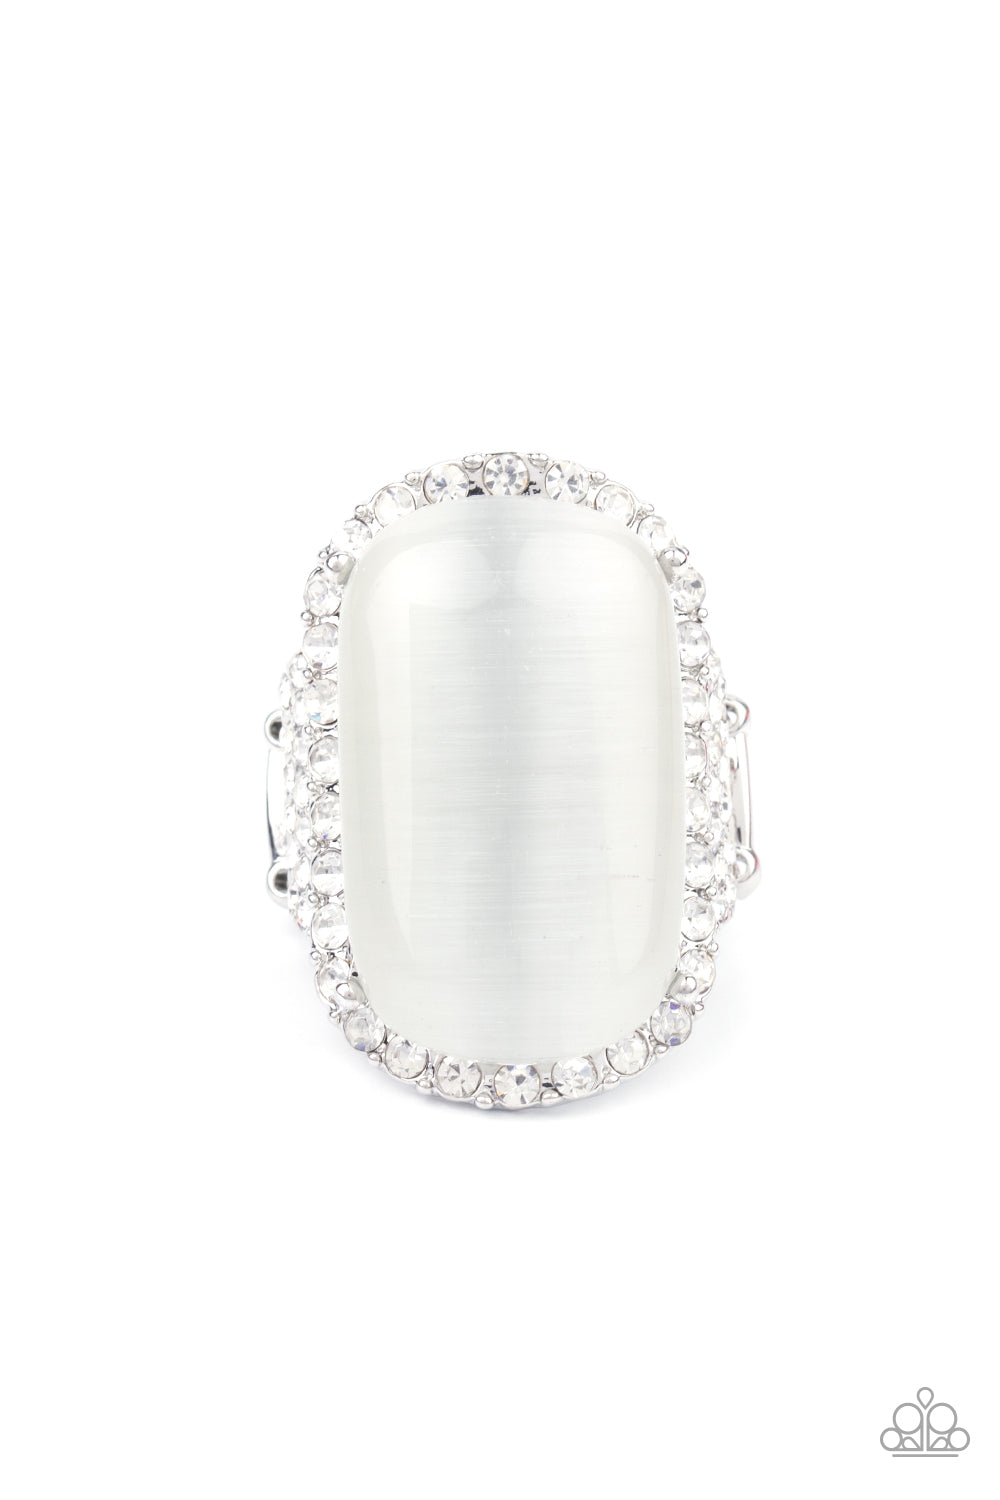 five-dollar-jewelry-thank-your-luxe-y-stars-white-paparazzi-accessories